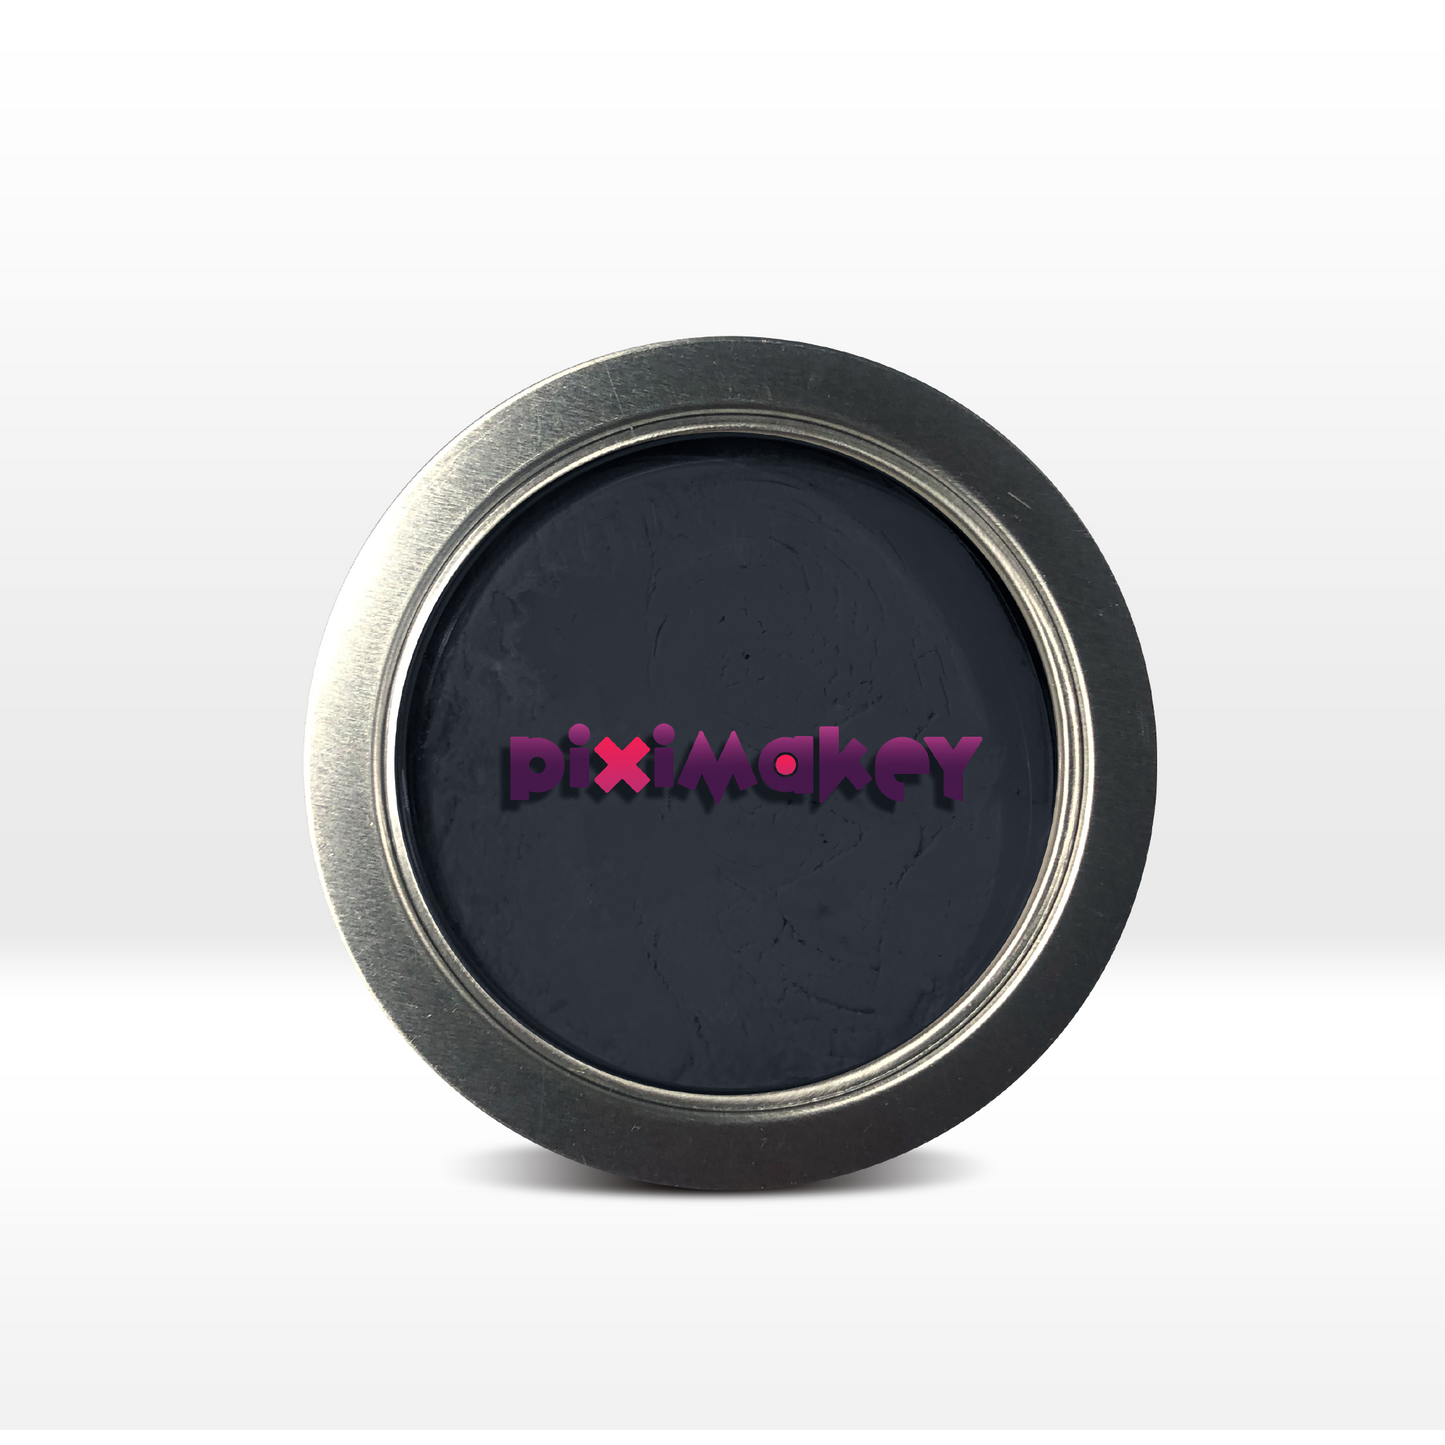 Piximakey Animation Clay (Pixi Stone), Tin Can with 150g Animation Clay